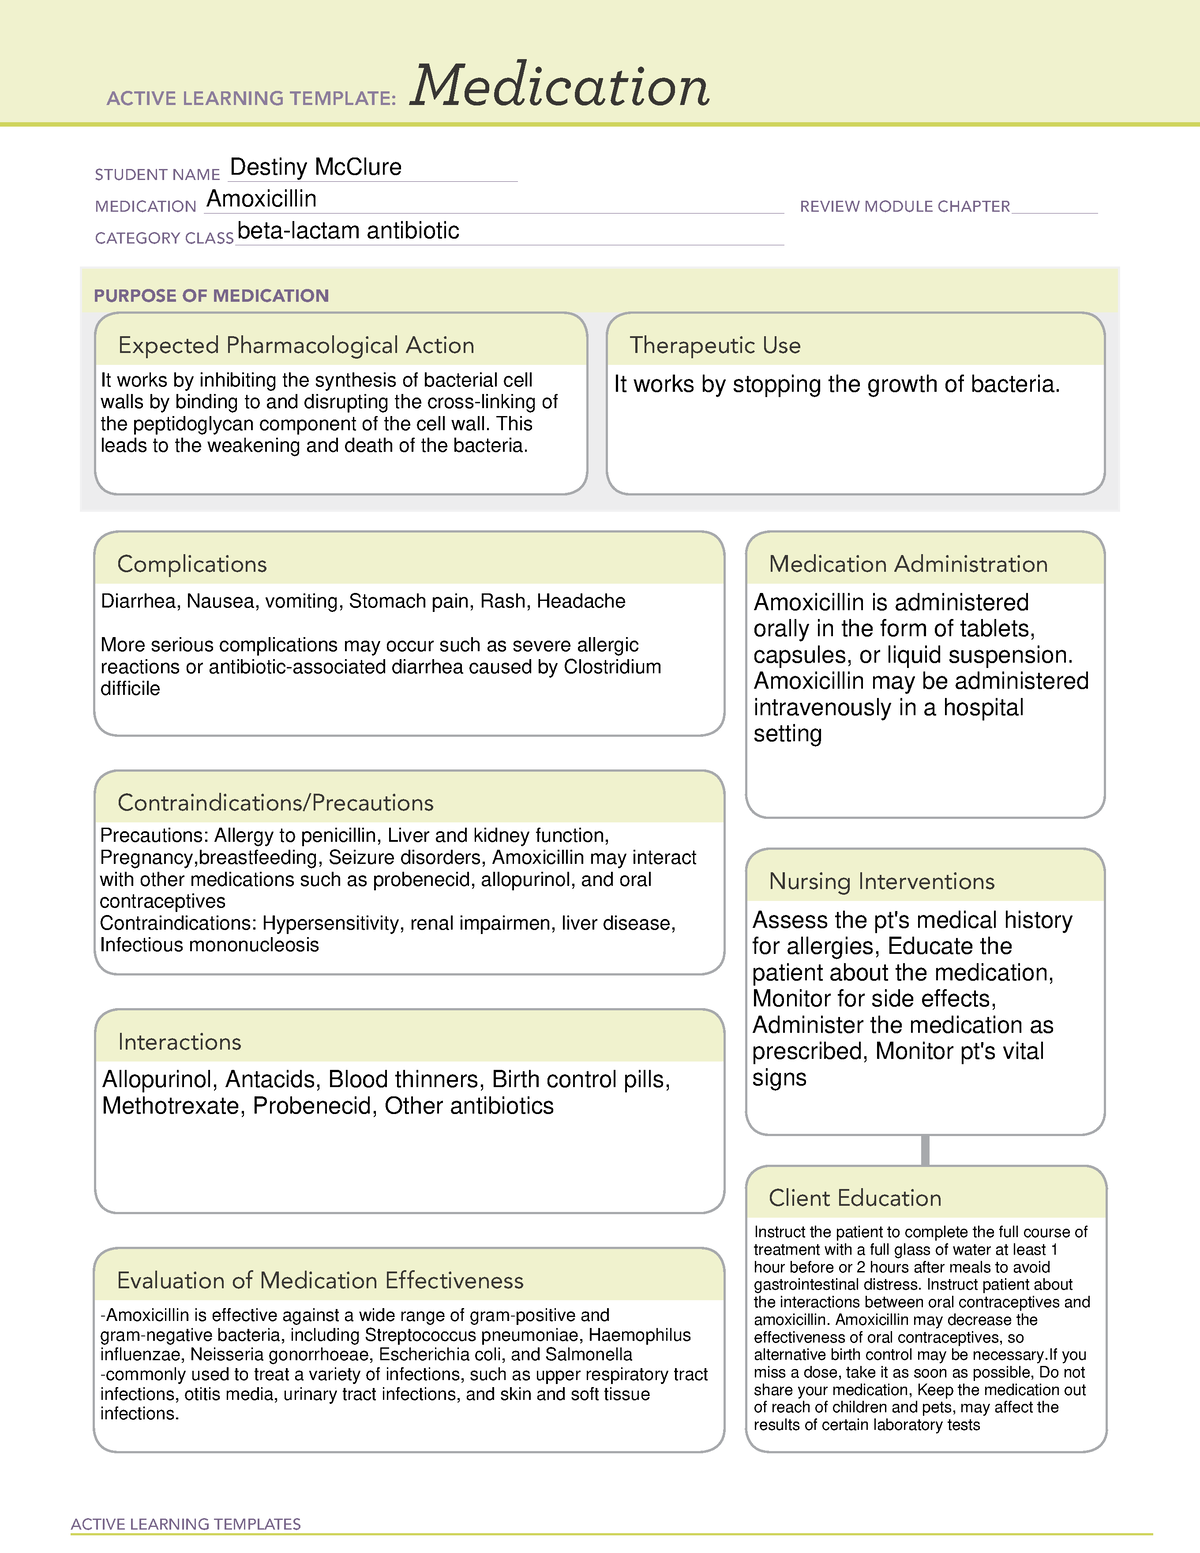 ACTIVE LEARNING TEMPLATE Medication Amoxicillin ACTIVE LEARNING